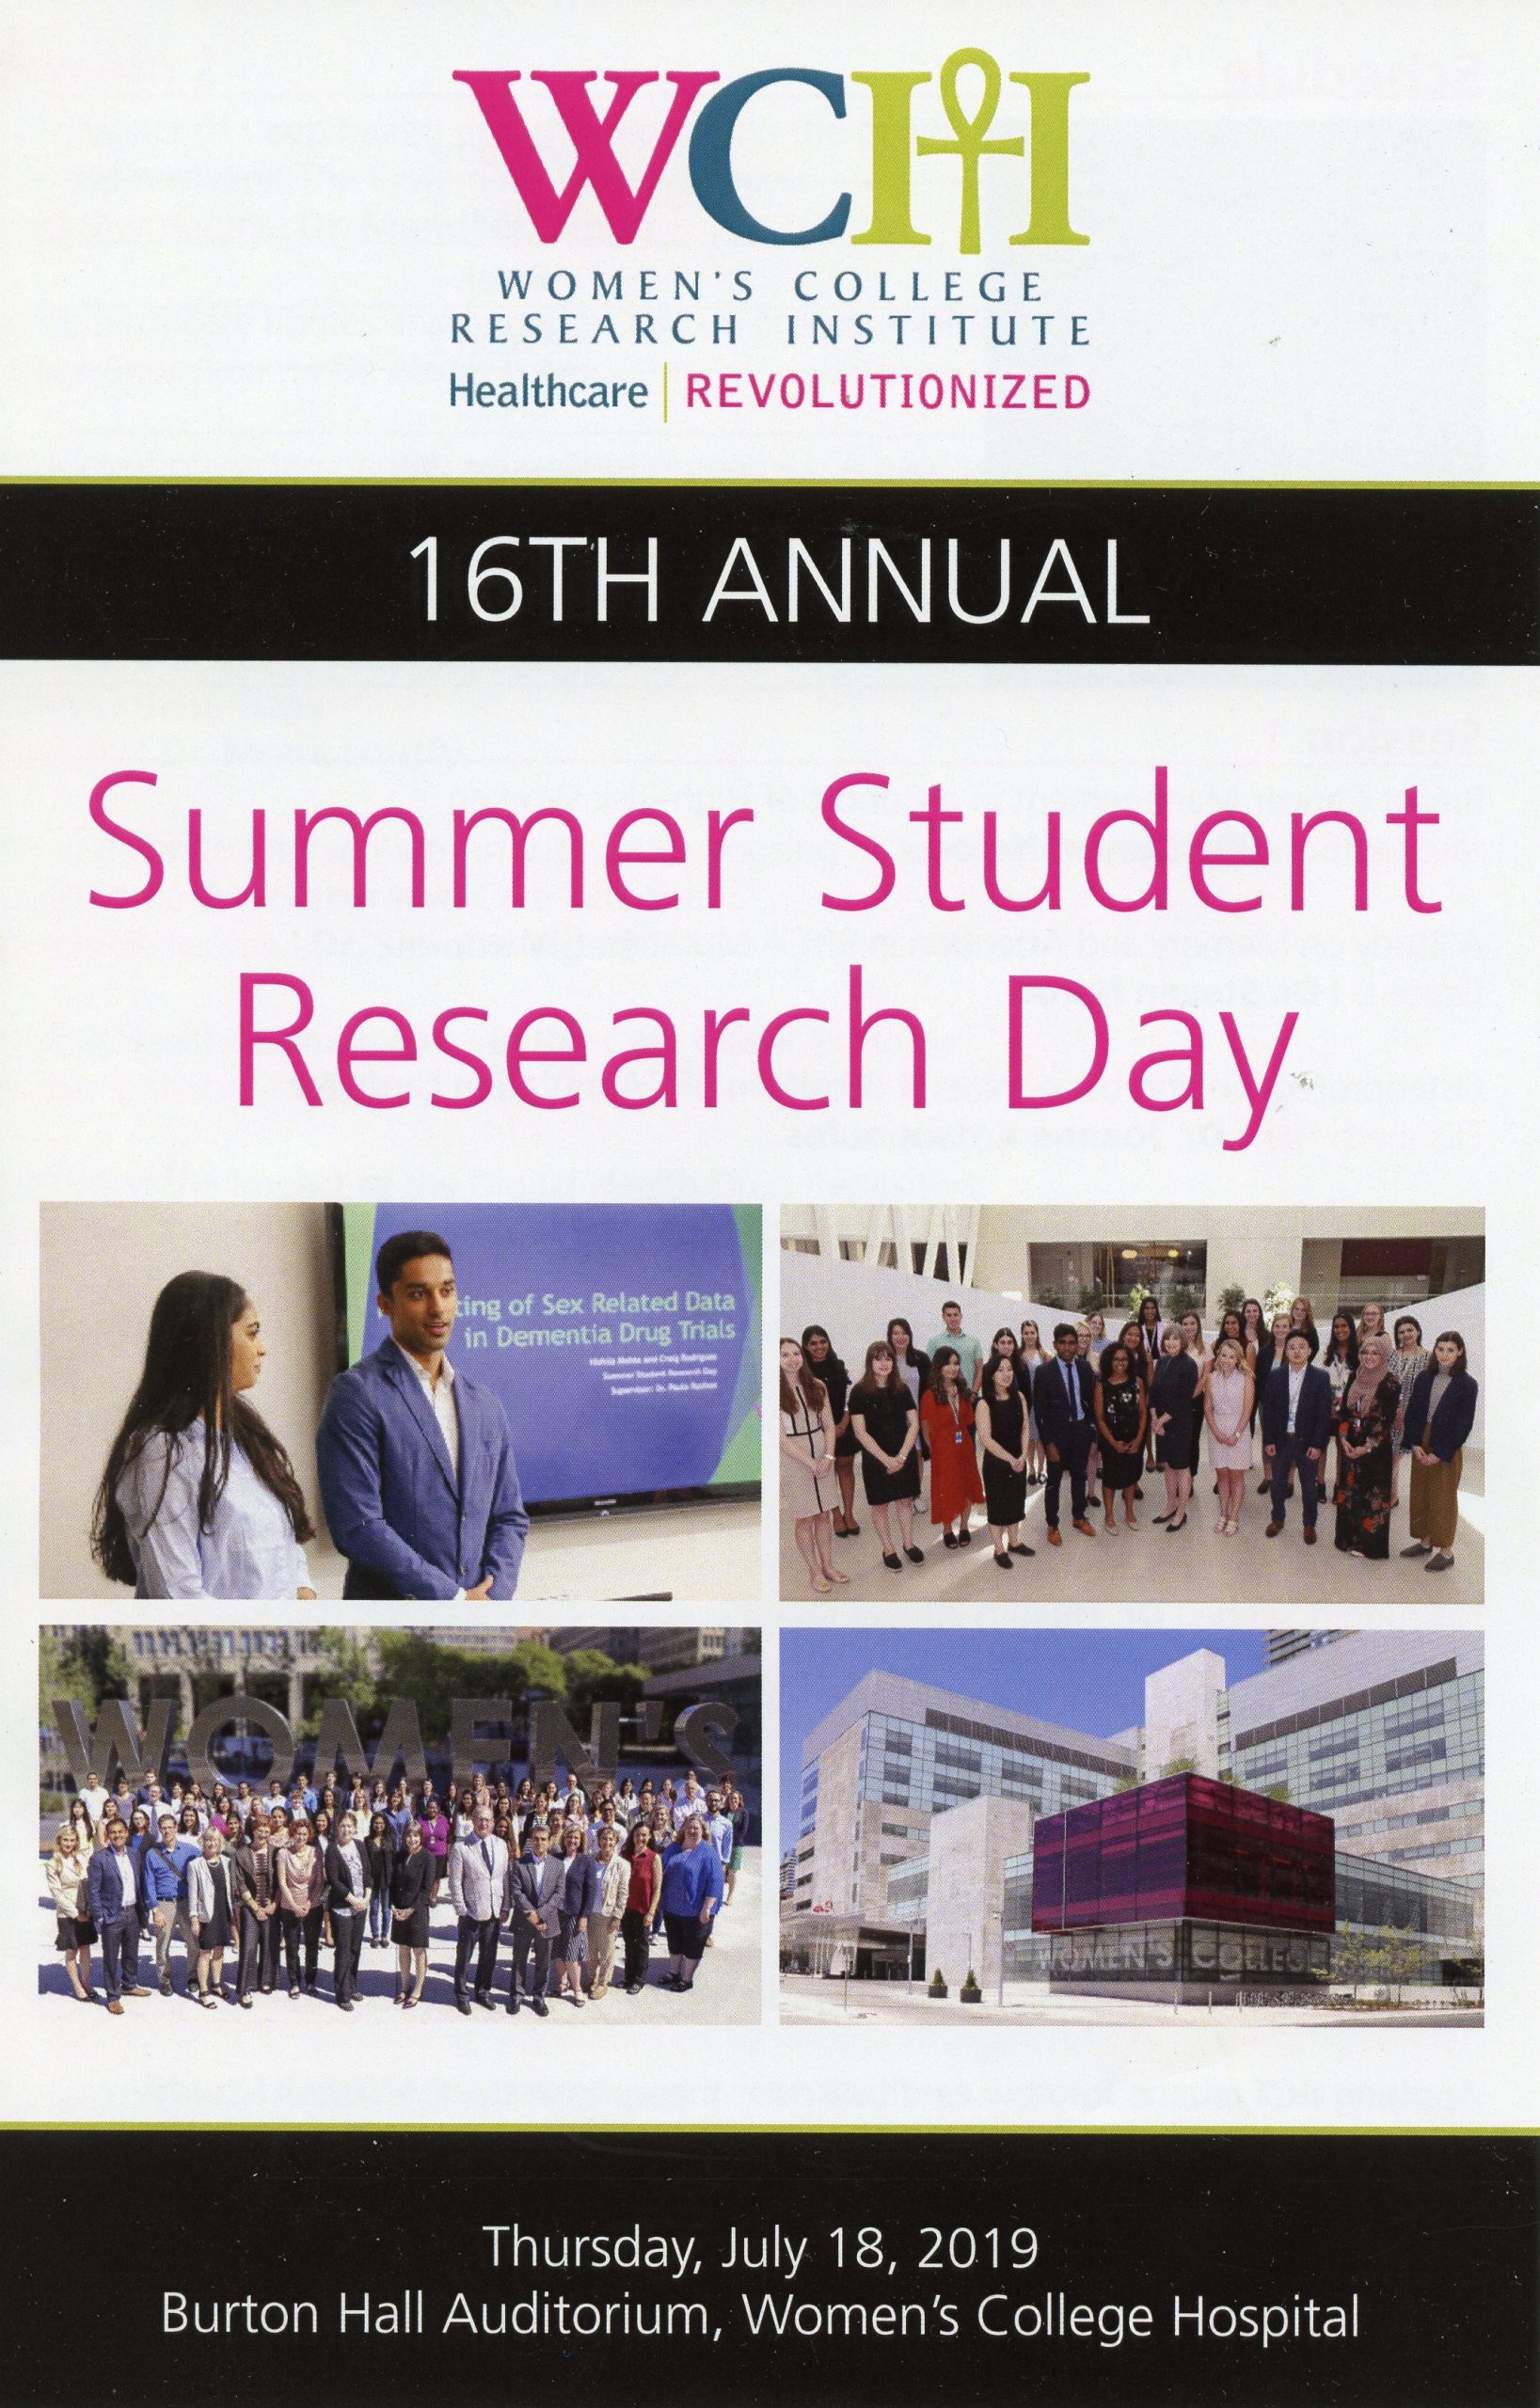 "Summer Student Research Day" poster.